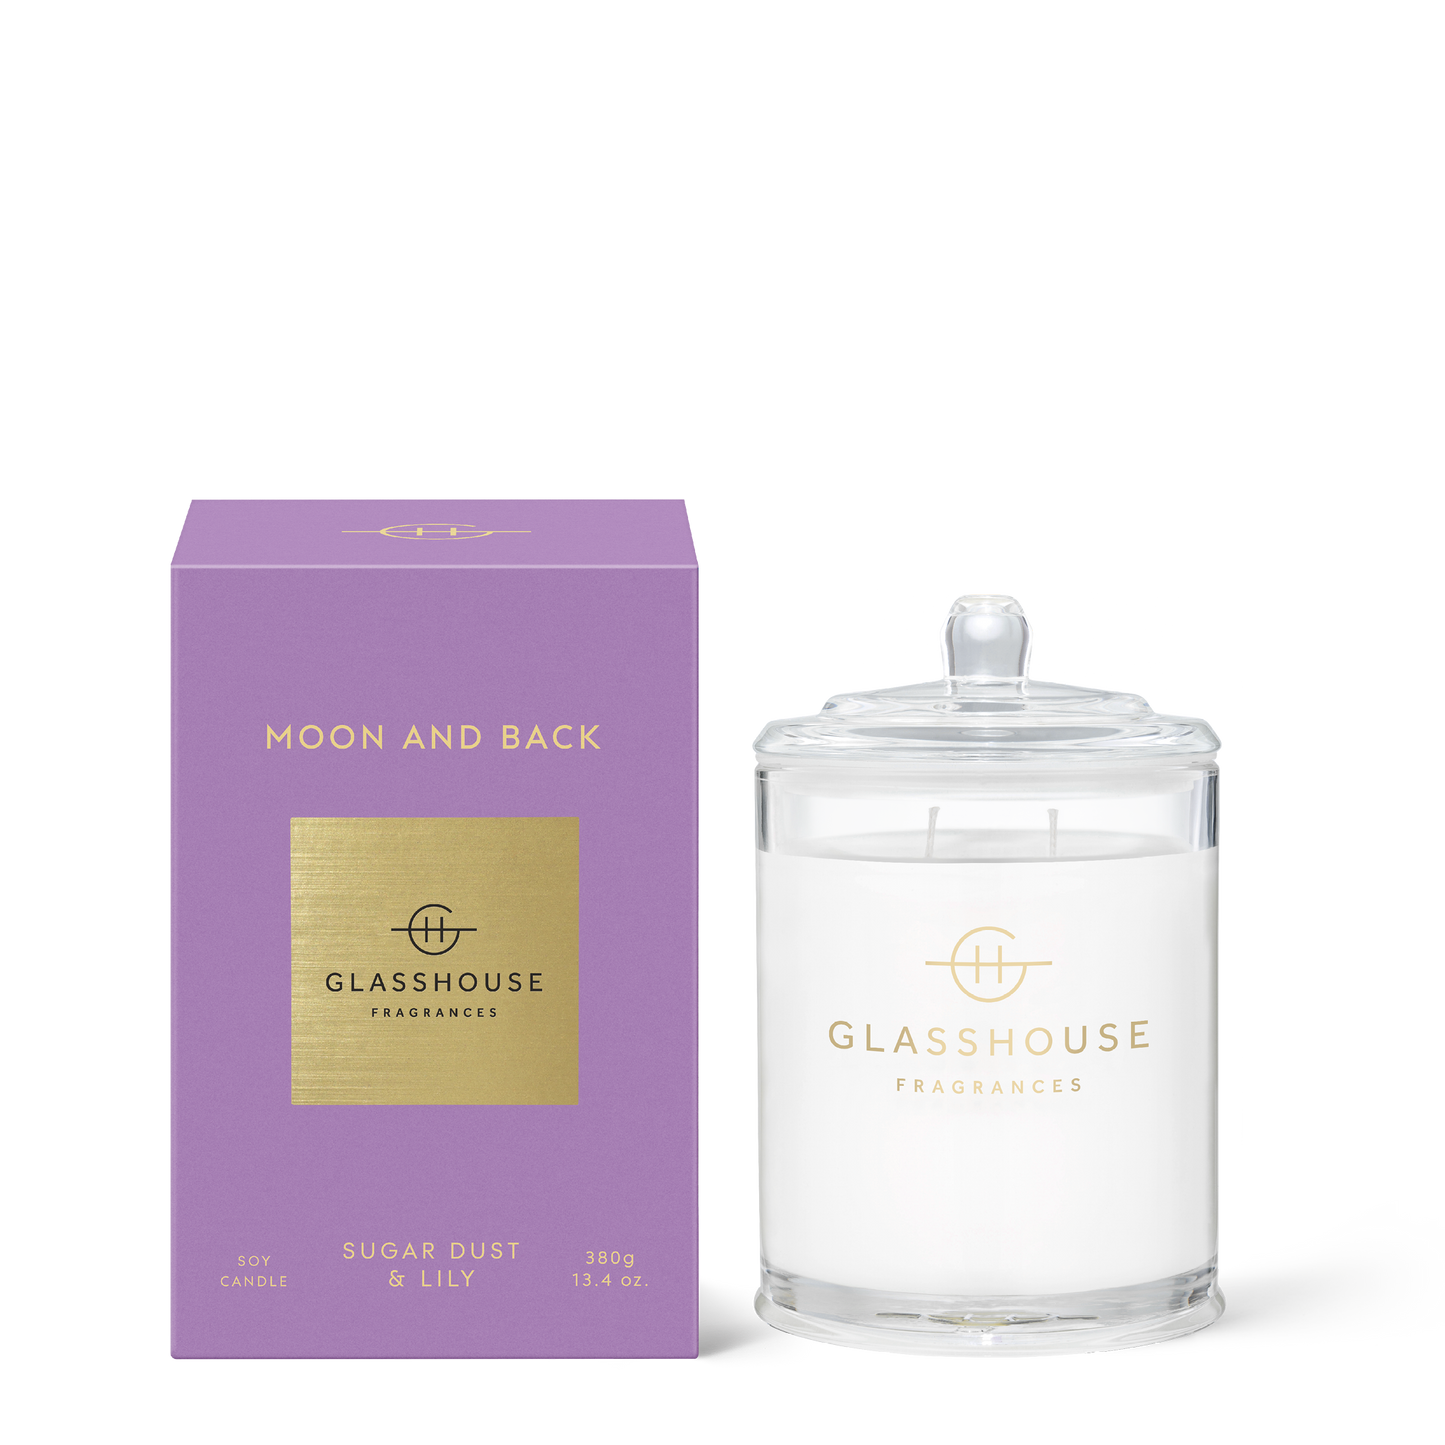 Moon And Back 380g Candle - Glasshouse Fragrances